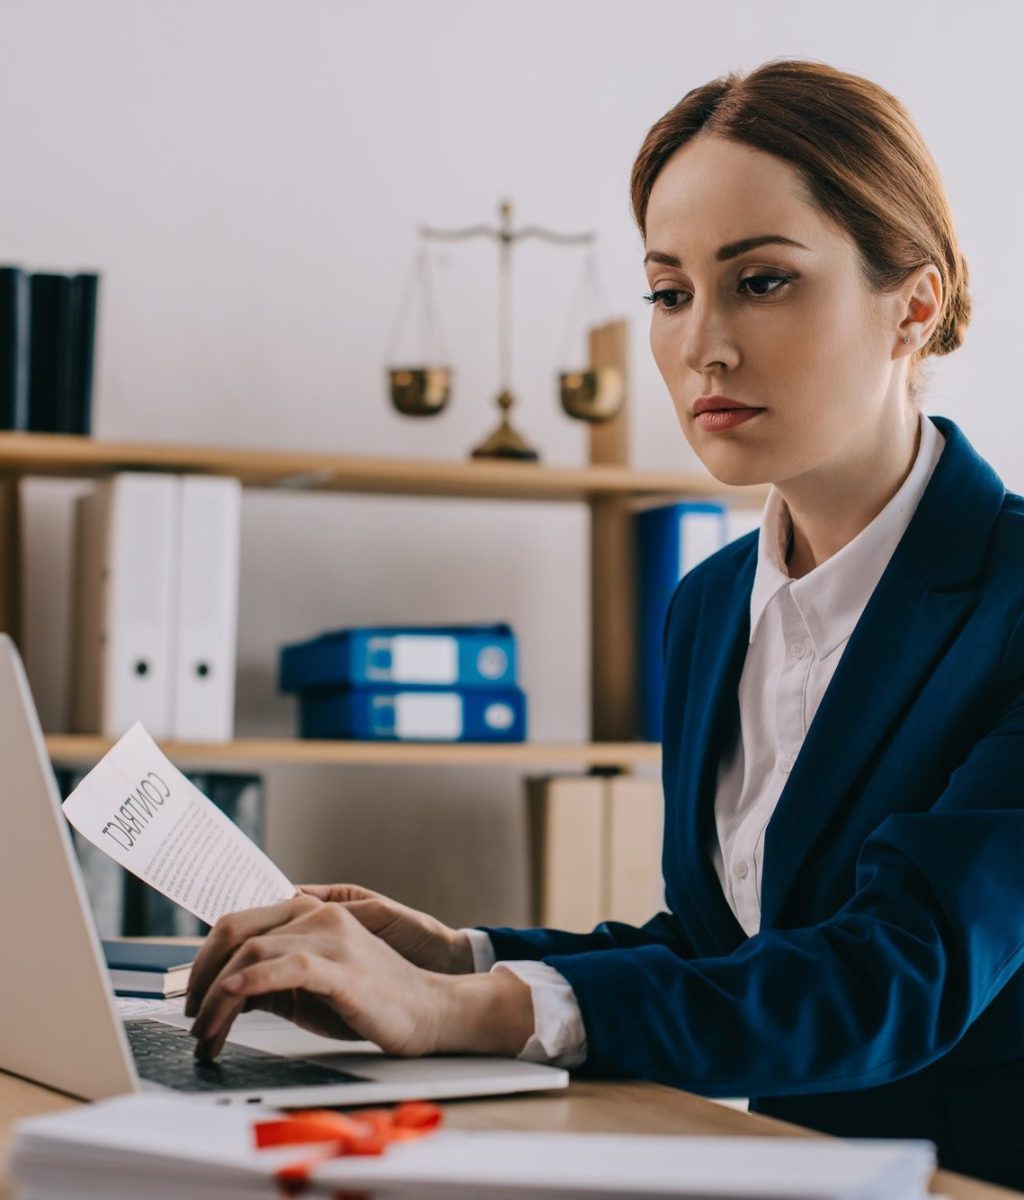 focused female lawyer working on laptop at workplace in office